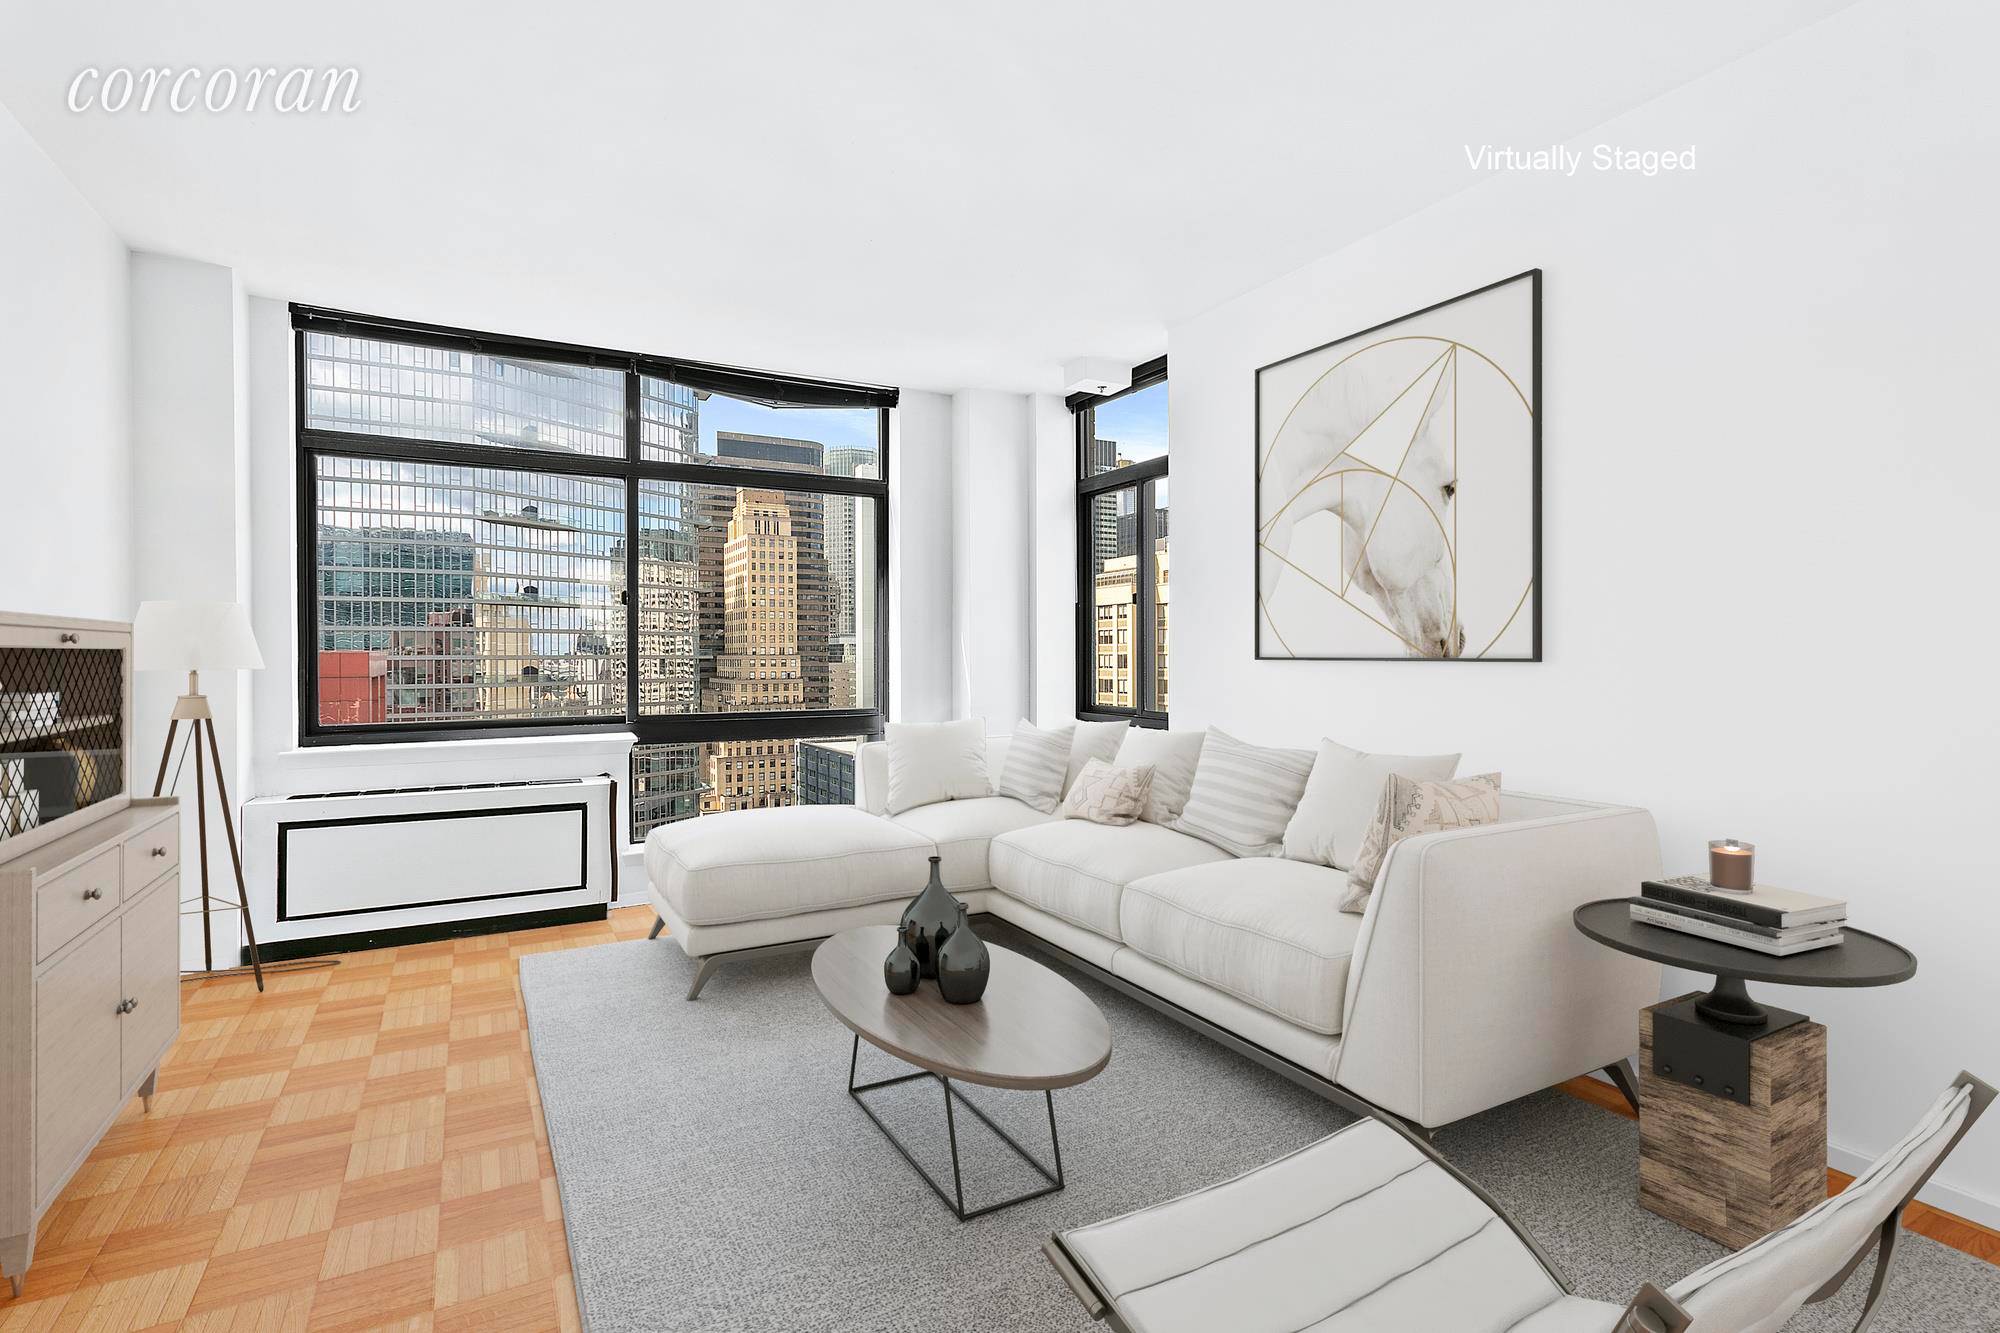 303 East 43rd Street is a boutique condominium in a prime midtown location that is close to the U.